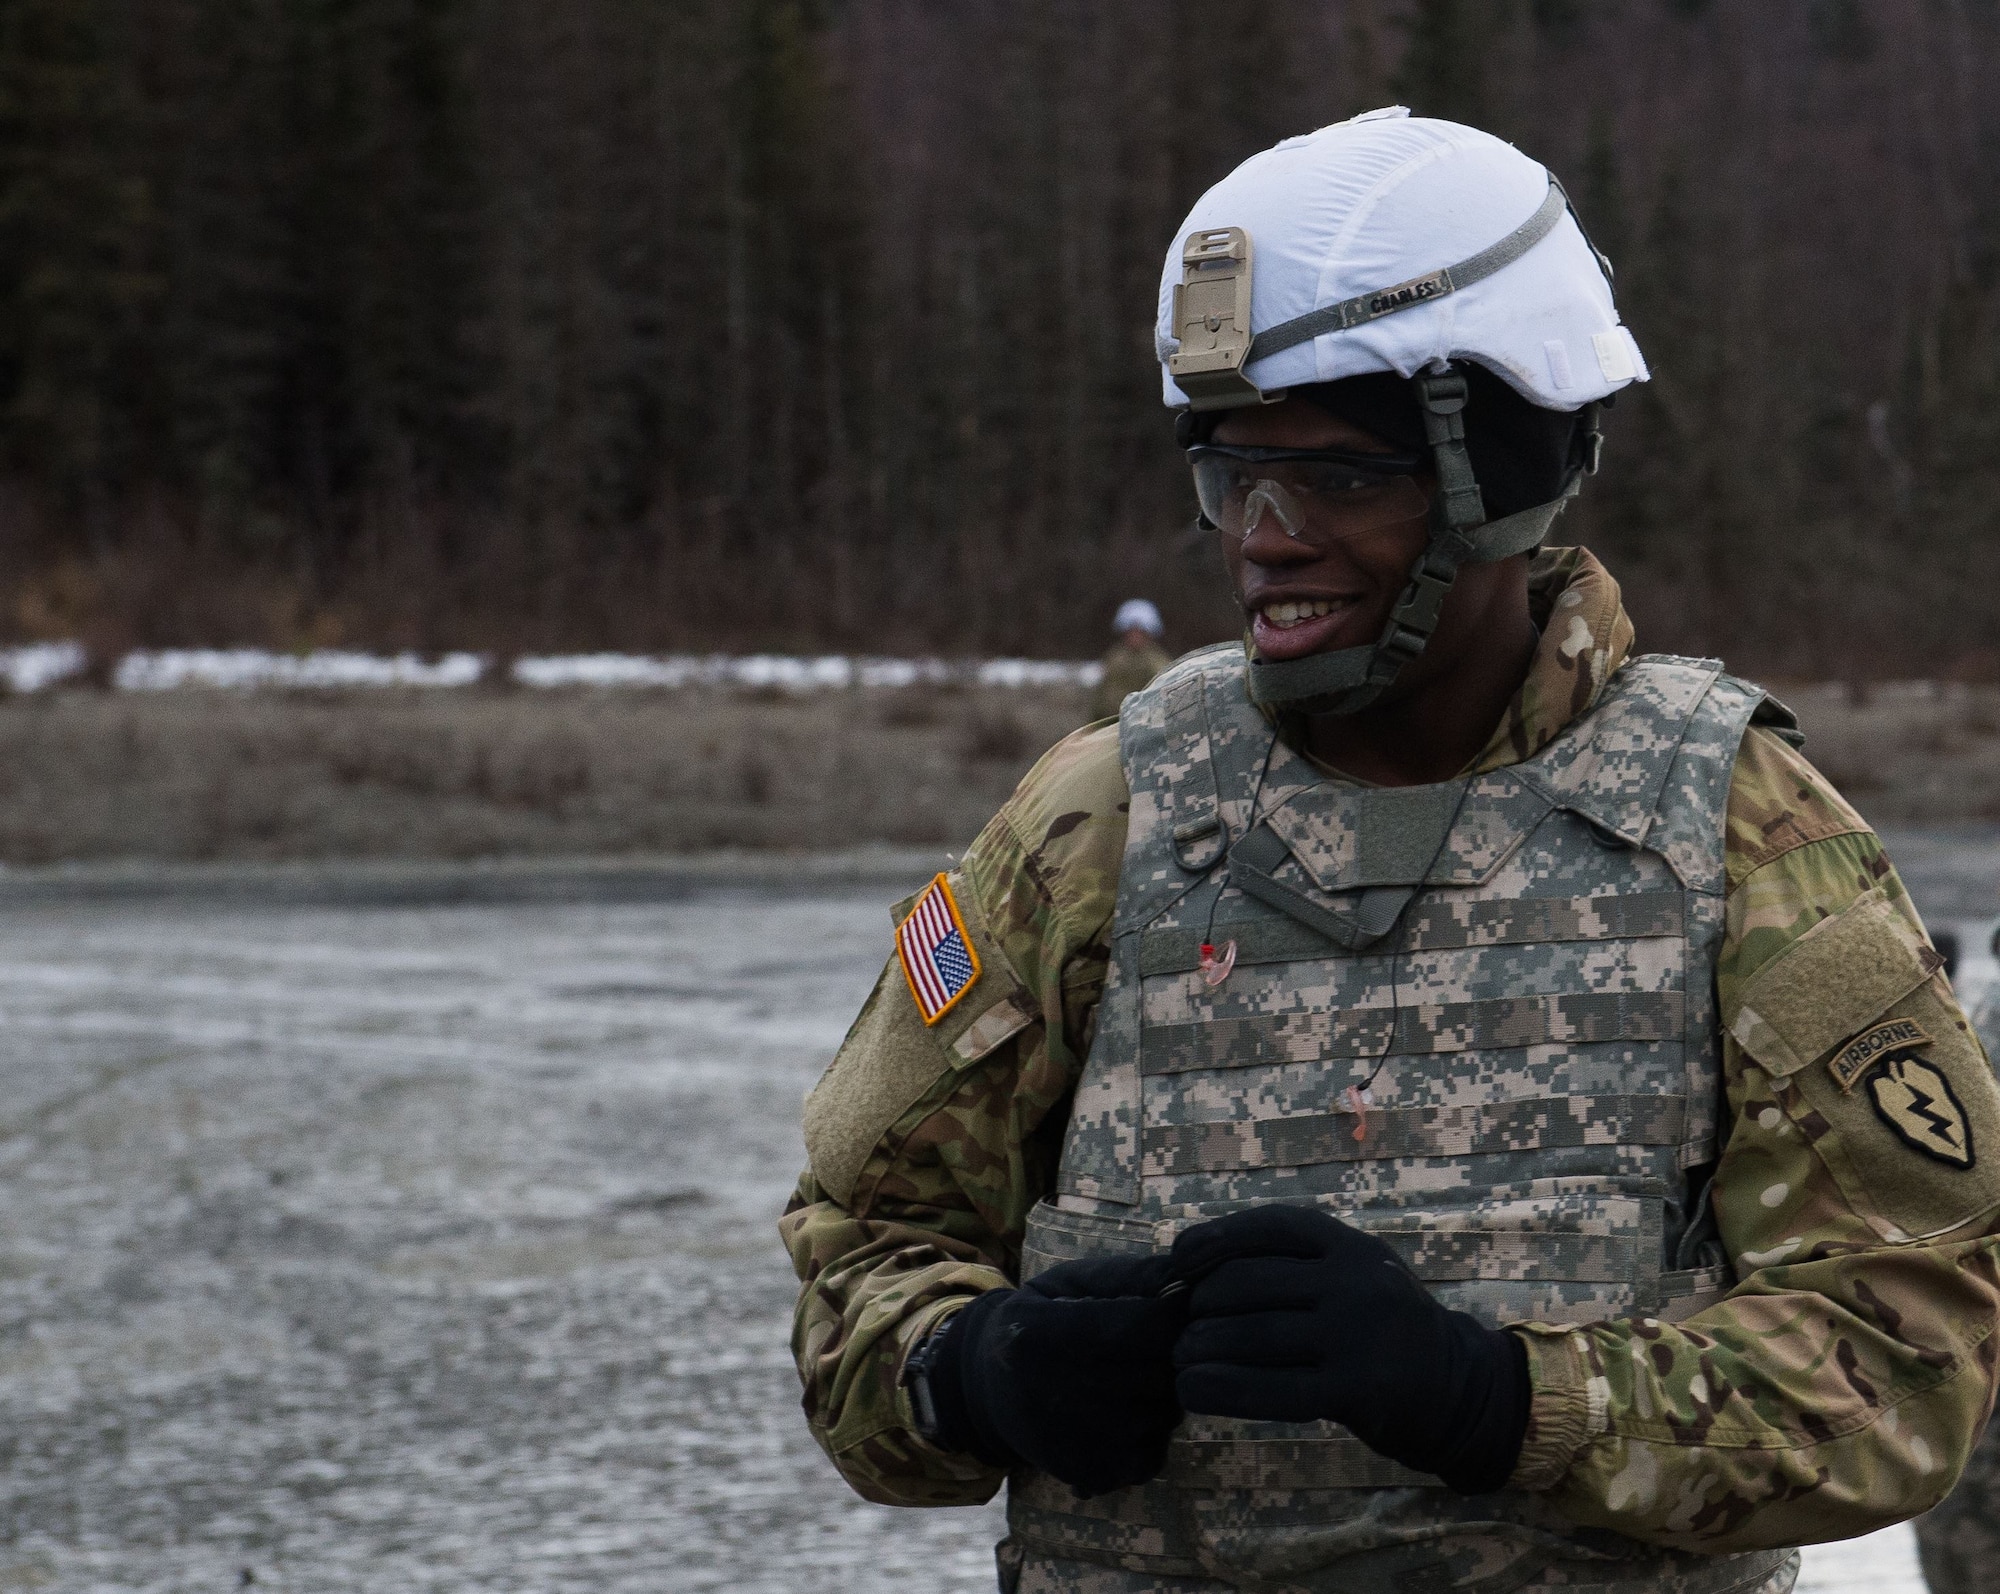 U.S. Army Pvt. Eriner Charles, a paratrooper assigned to 3rd Battalion, 509th Parachute Infantry Regiment, 4th Infantry Brigade Combat Team (Airborne), 25th Infantry Division, U.S. Army Alaska, clears debris from the range after M67 fragmentation grenade live fire training at Kraft Range on Joint Base Elmendorf-Richardson, Alaska, Dec. 12, 2017. A ‘pit’ noncommissioned officer supervised the Soldiers throwing grenades to maintain a safe instructional environment, enforce precaution standards, and direct them on proper handling of explosives. The fragmentation hand grenade has a lethal radius of five meters and can produce casualties up to 15 meters, dispersing fragments as far as 230 meters.